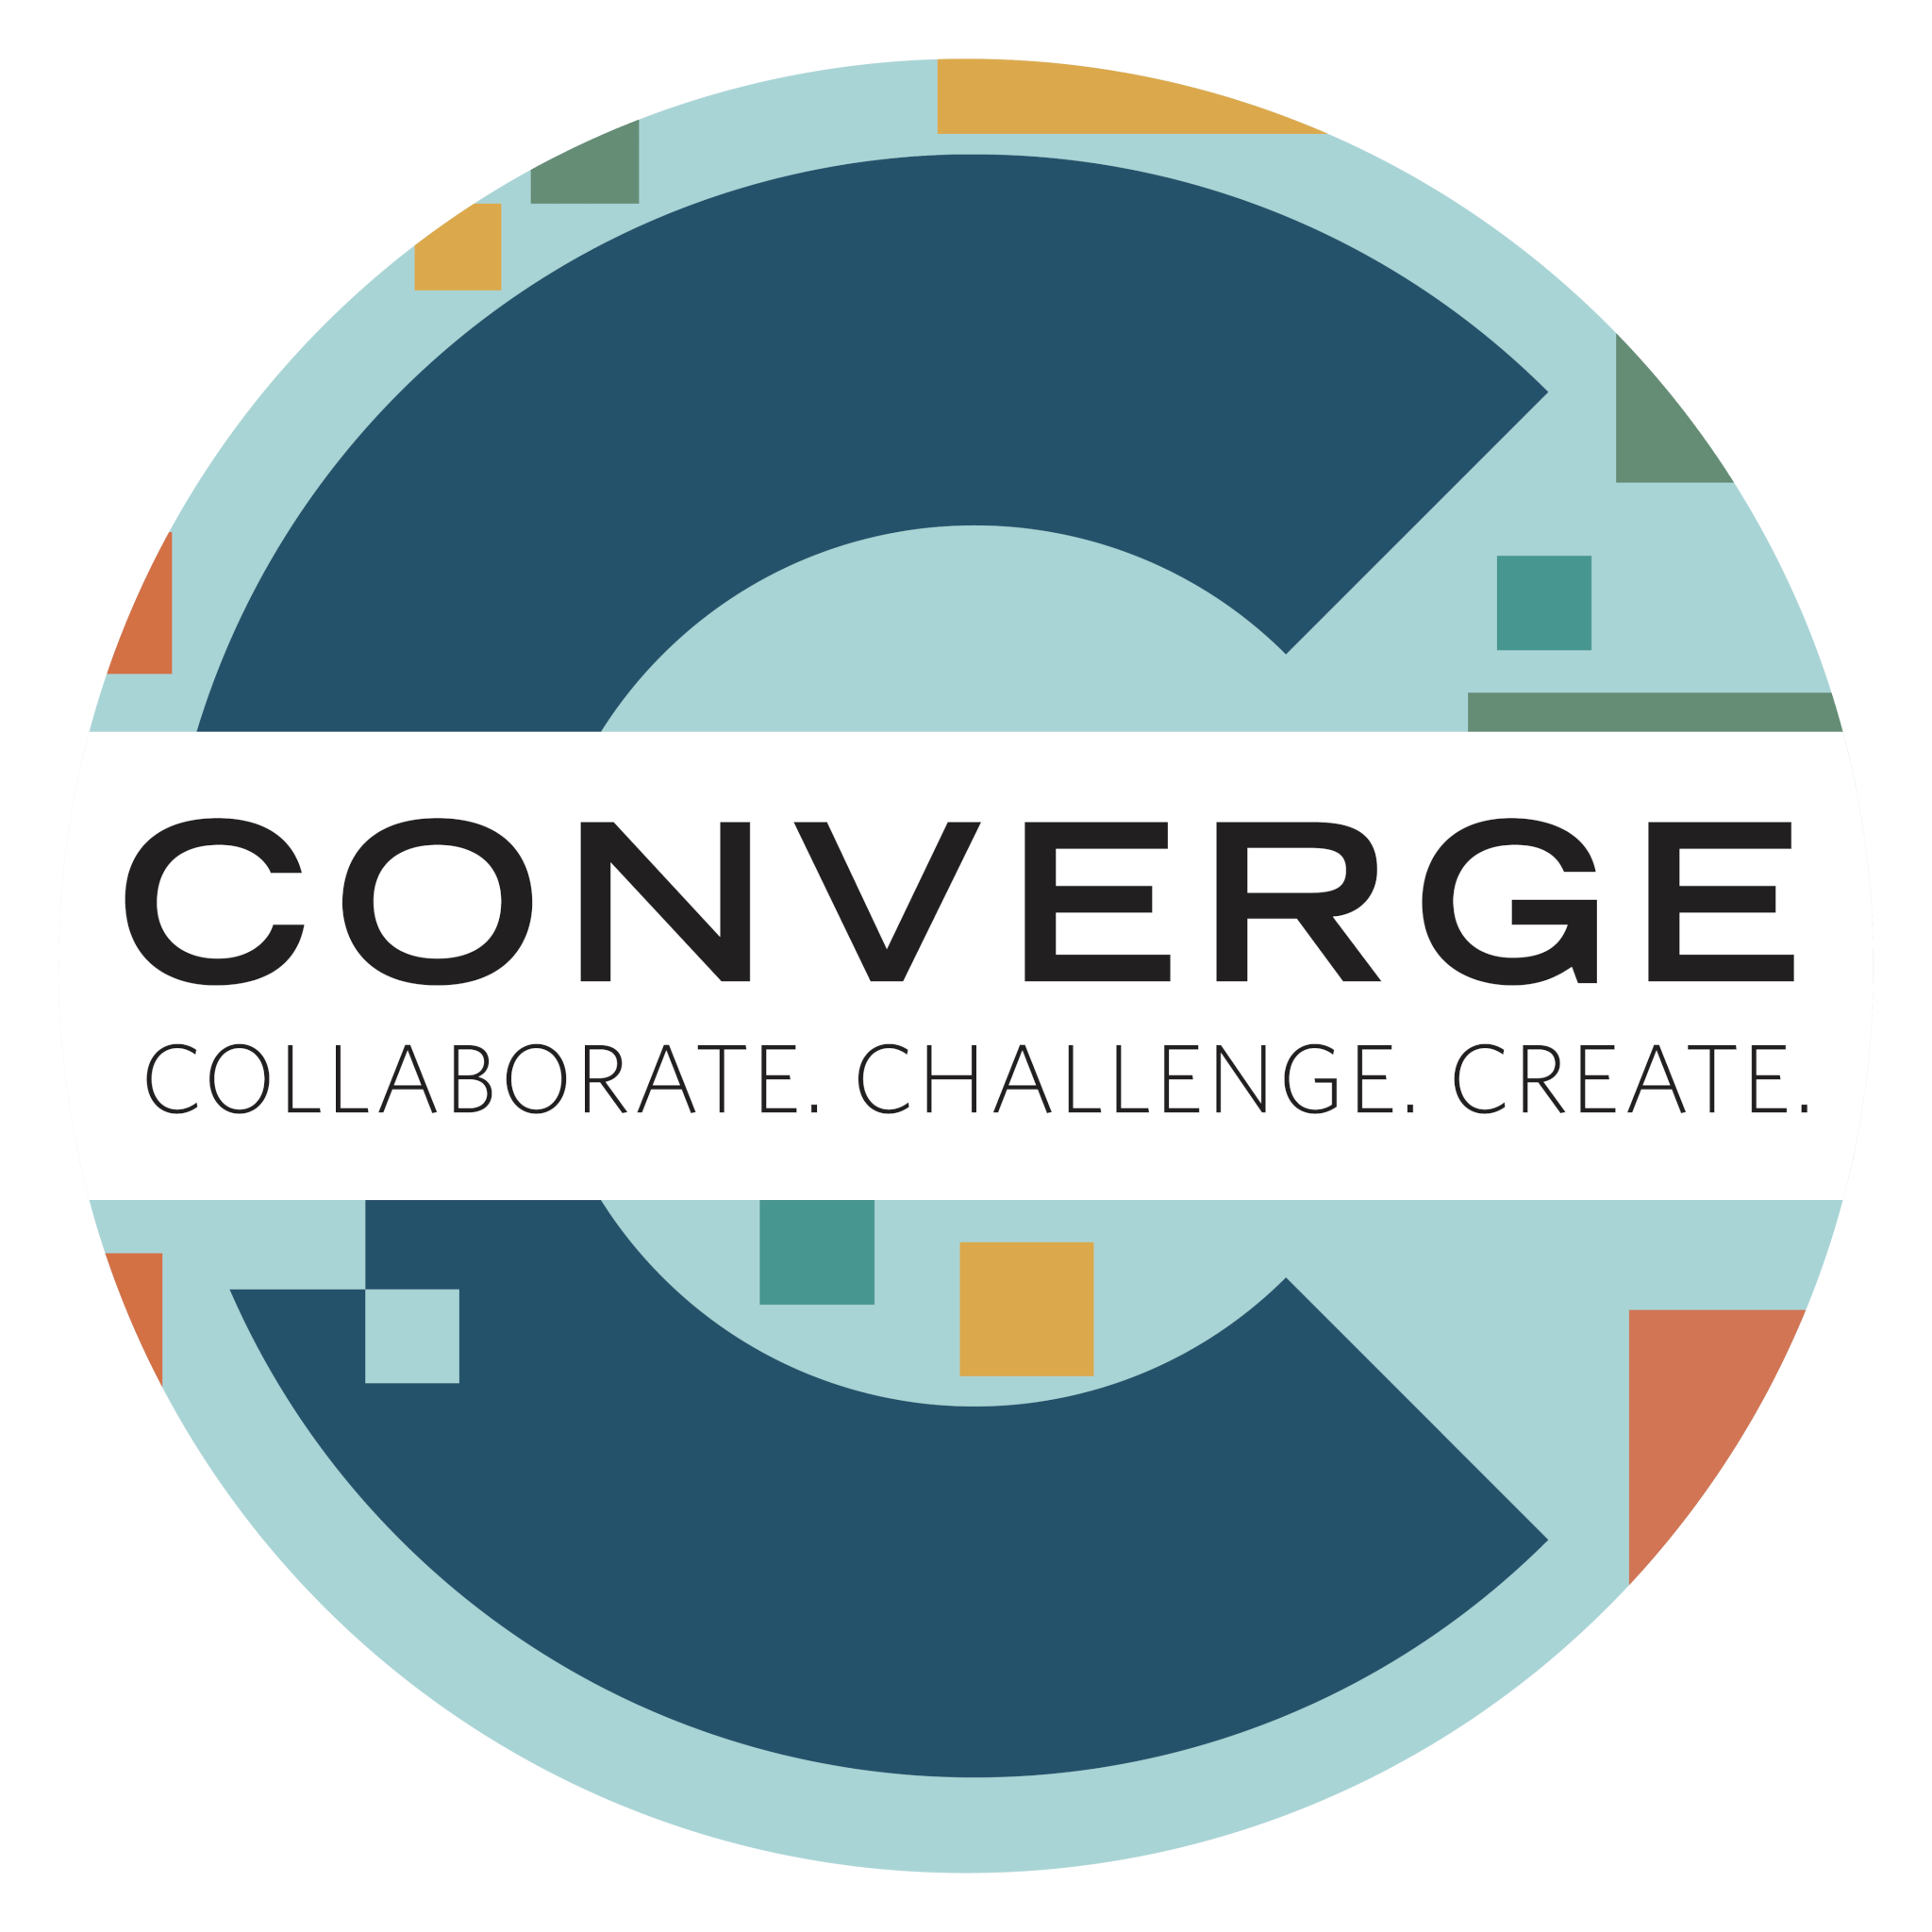 Converge Conference circle graphic